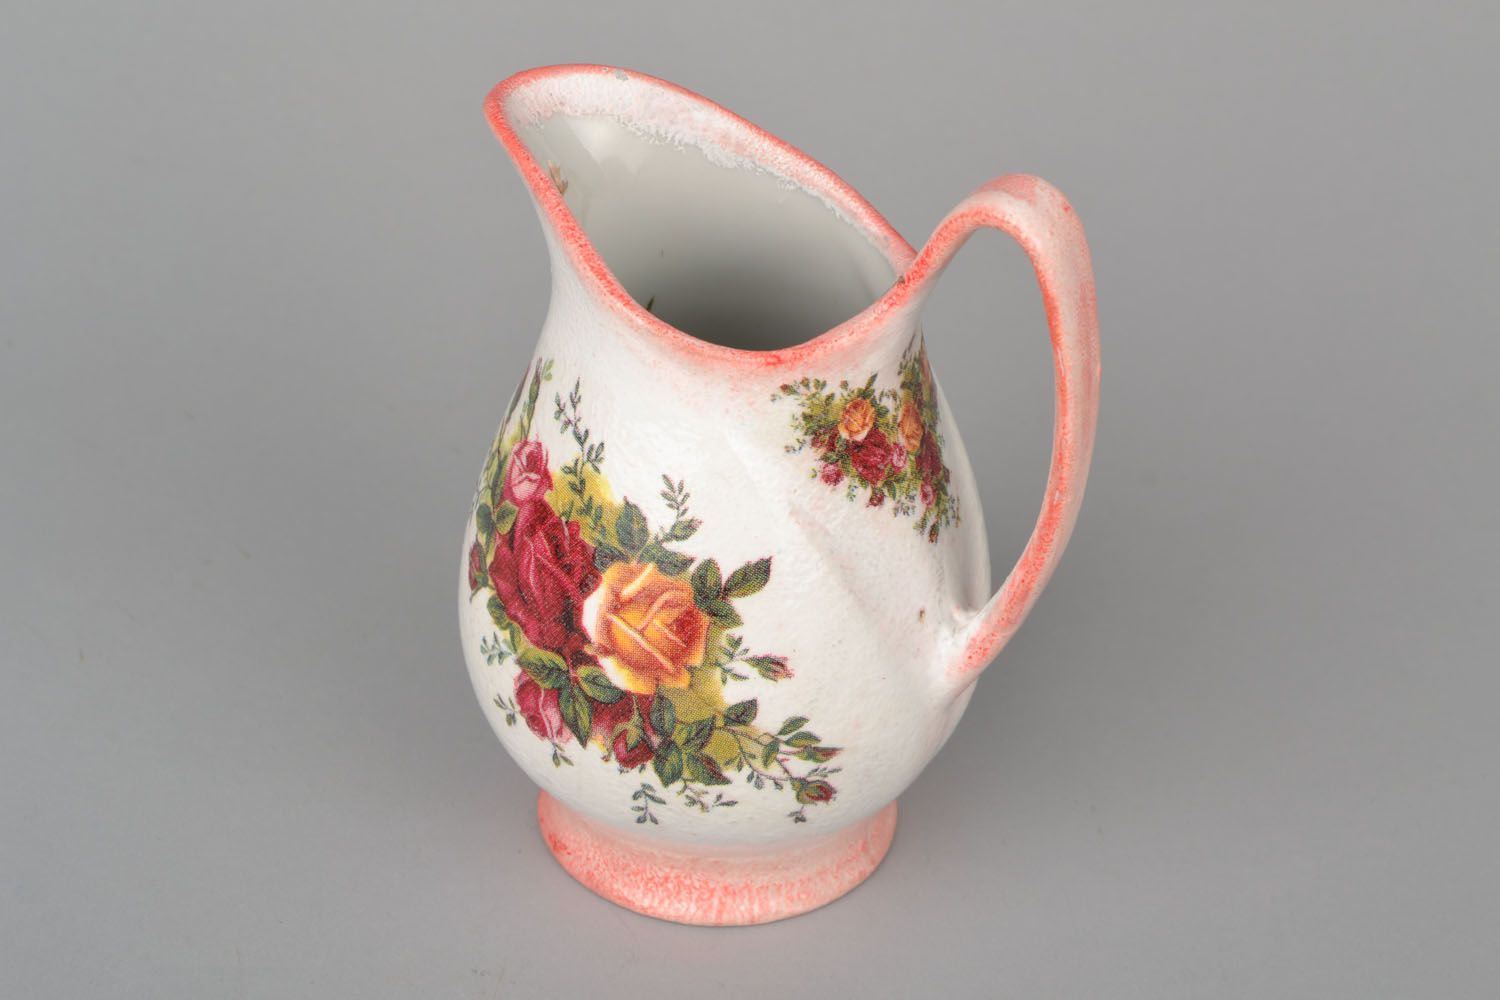 20 oz ceramic water pitcher in floral style in white and rose colors 0,54 lb photo 3